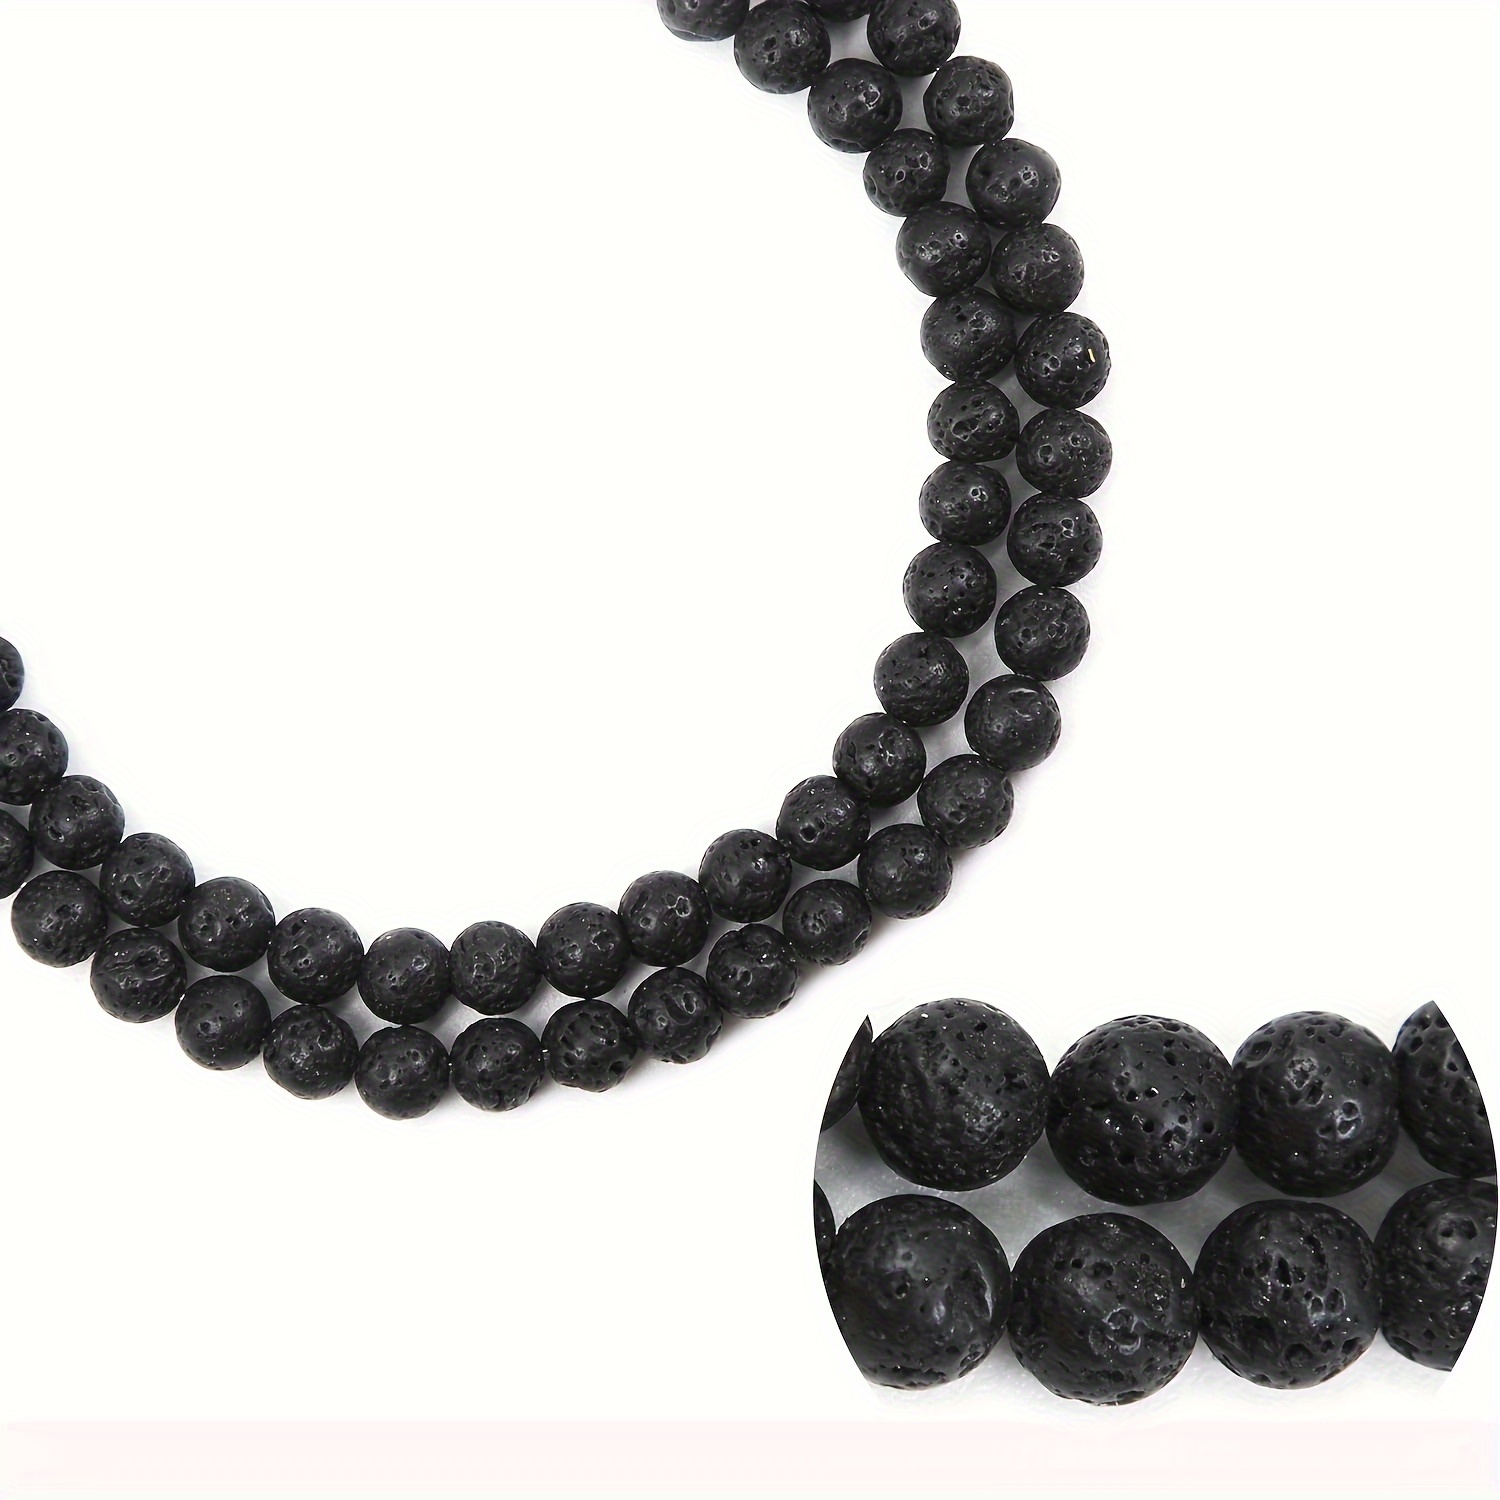 

Natural Black Lava Gemstone Beads - Round Loose Spacer Beads For Diy Jewelry Making, Bracelets & Necklaces - Perfect For Father's Day, Mother's Day & Graduation Gifts, 15" Strand, Sizes 4/6/8/10/12mm